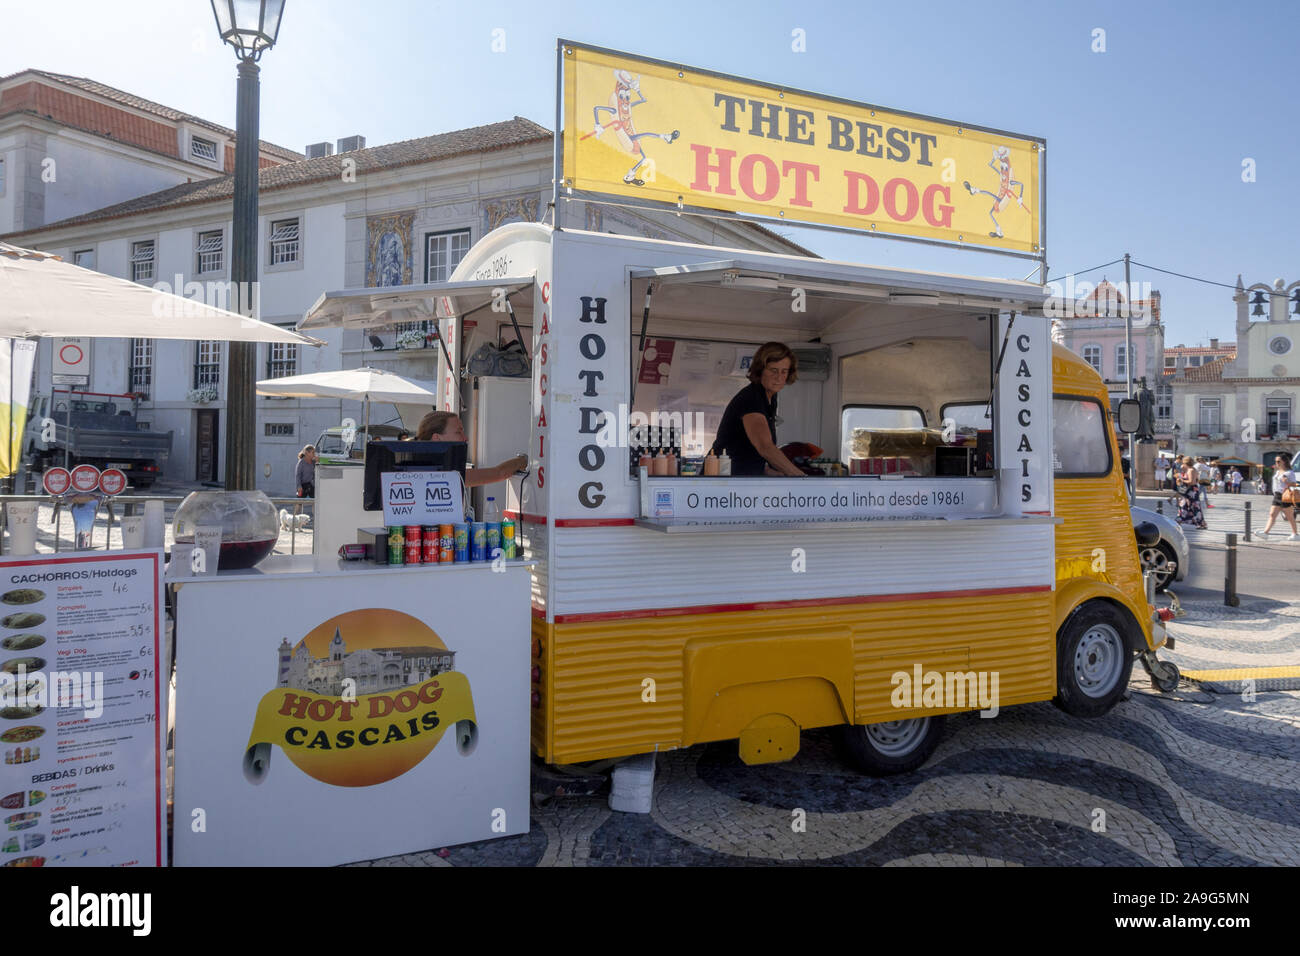 Street Food Vendor Selling The Best Hot Dog From A Retro Old Van On The Promenade At The Praia dos Pescadores Beach Cascais Lisbon Portugal Stock Photo